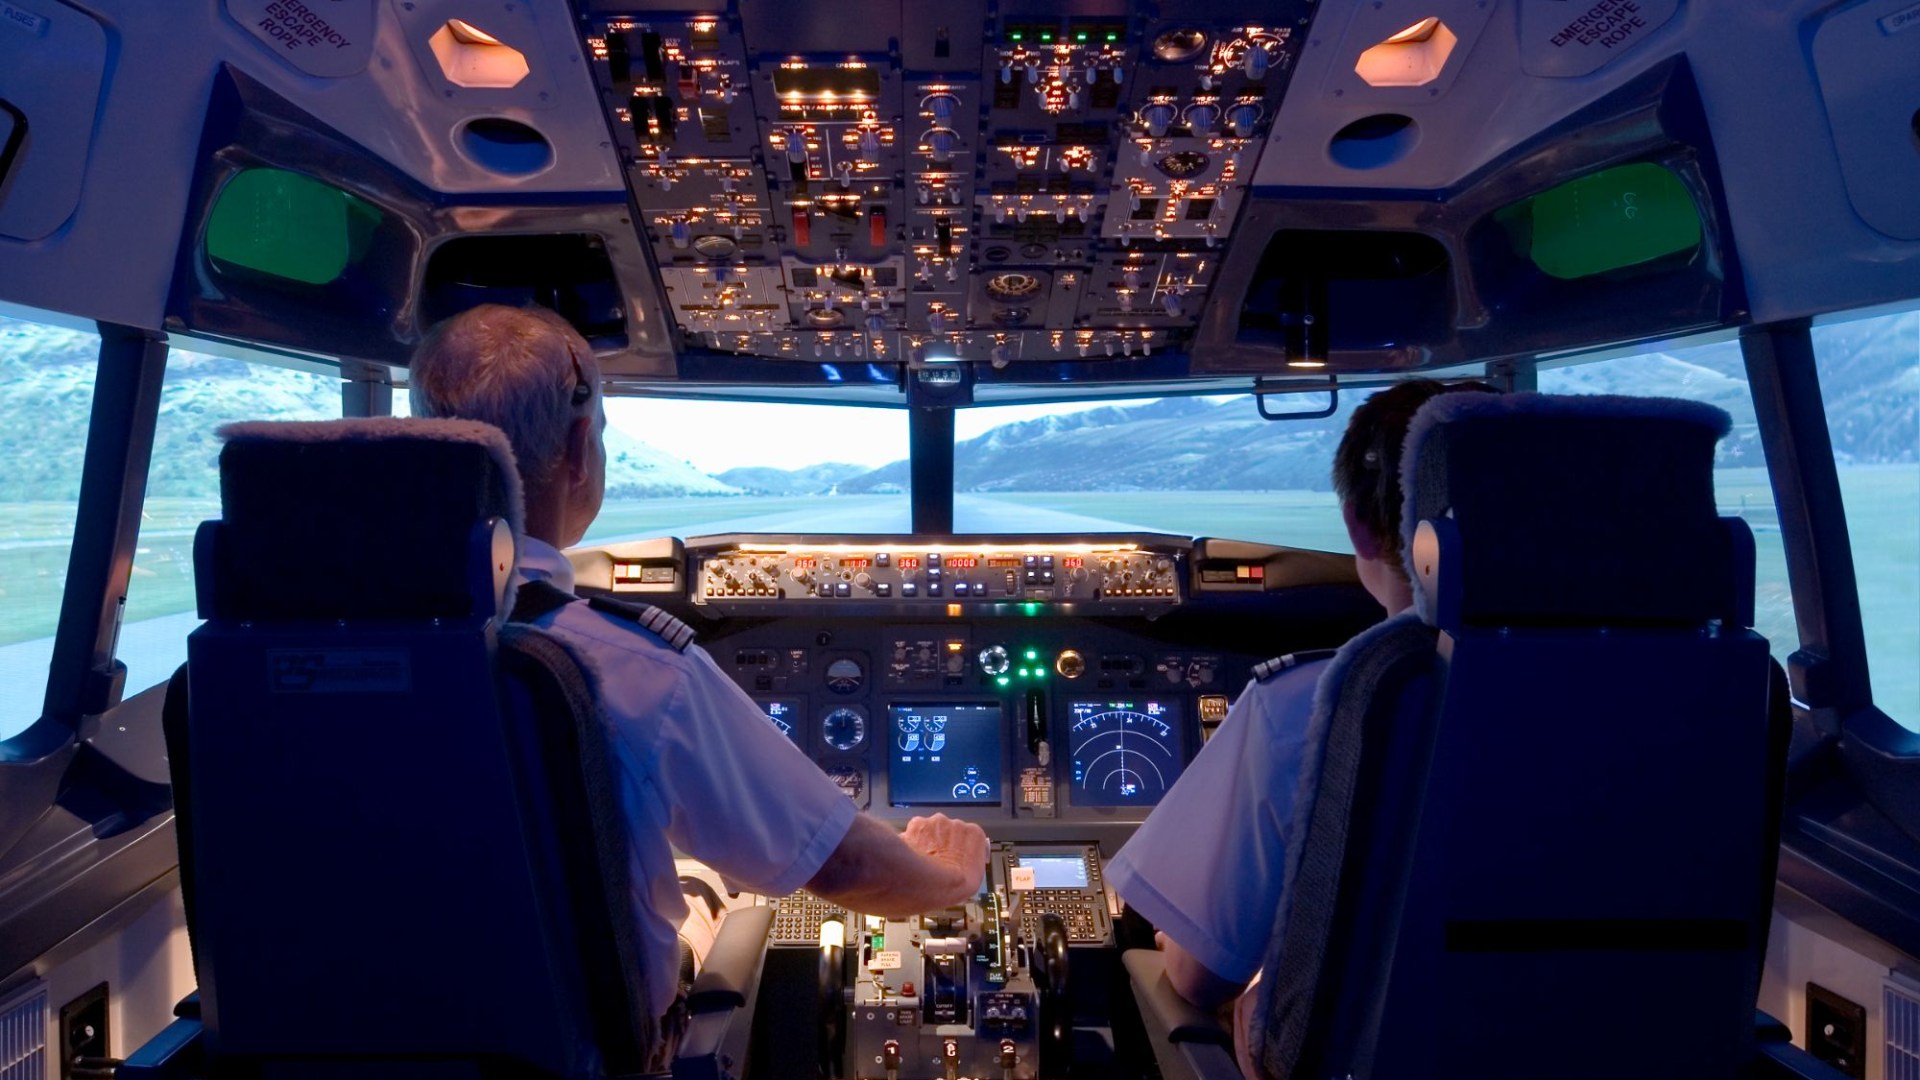 I’m a pilot and passengers think we rely on autopilot … here’s why they’re wrong especially in dangerous situations